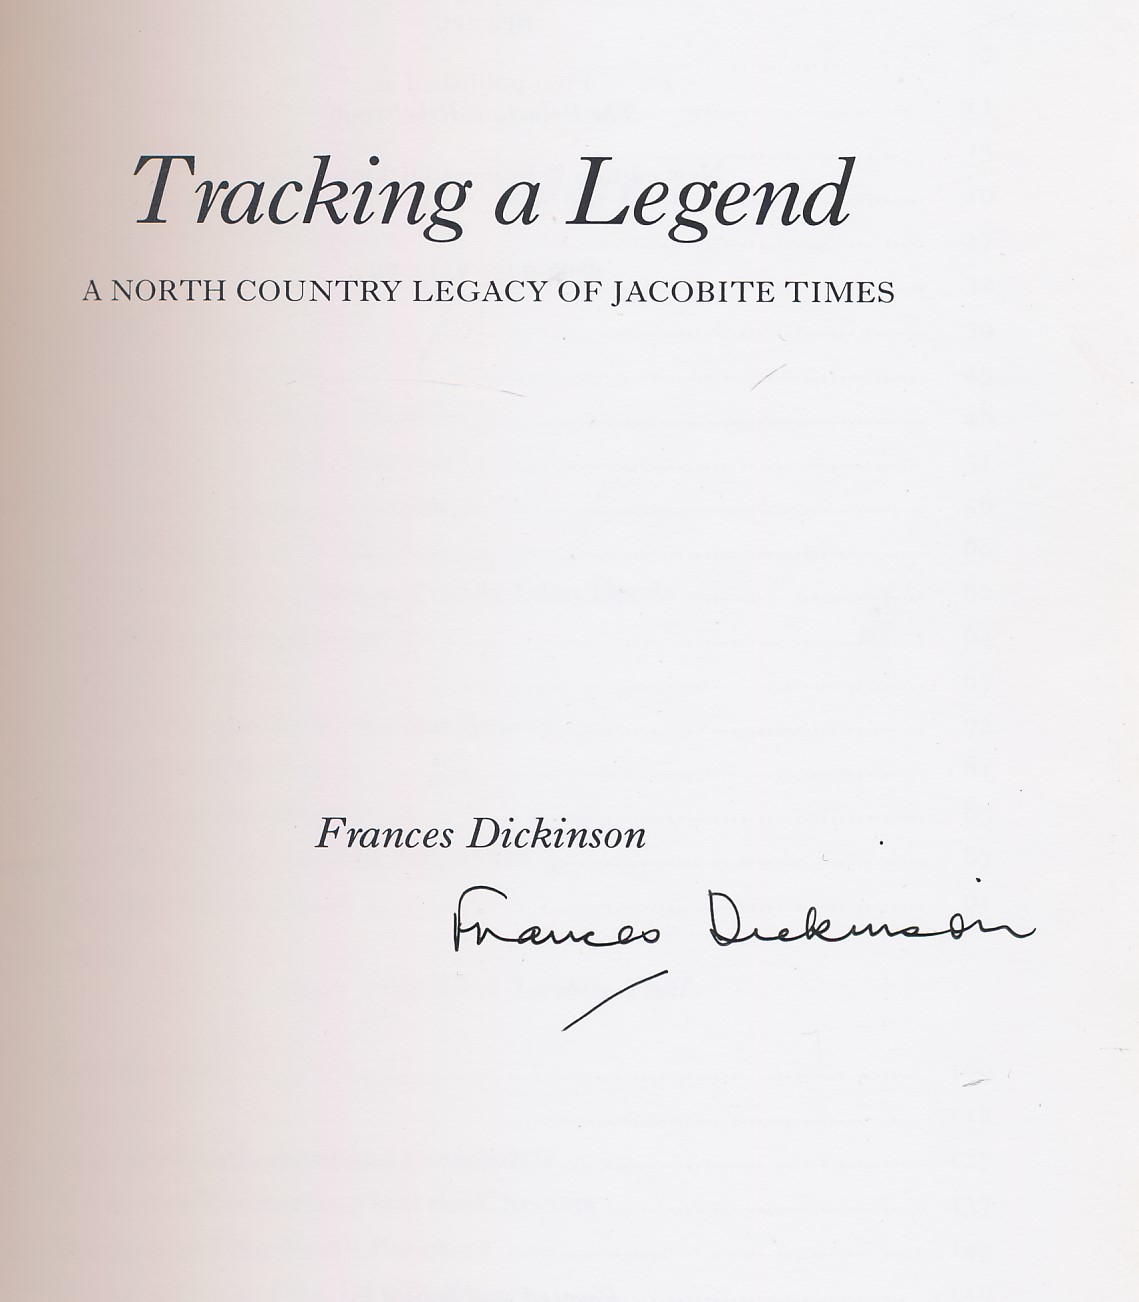 Tracking a Legend. A North Country Legacy of Jacobite Times. Signed copy.